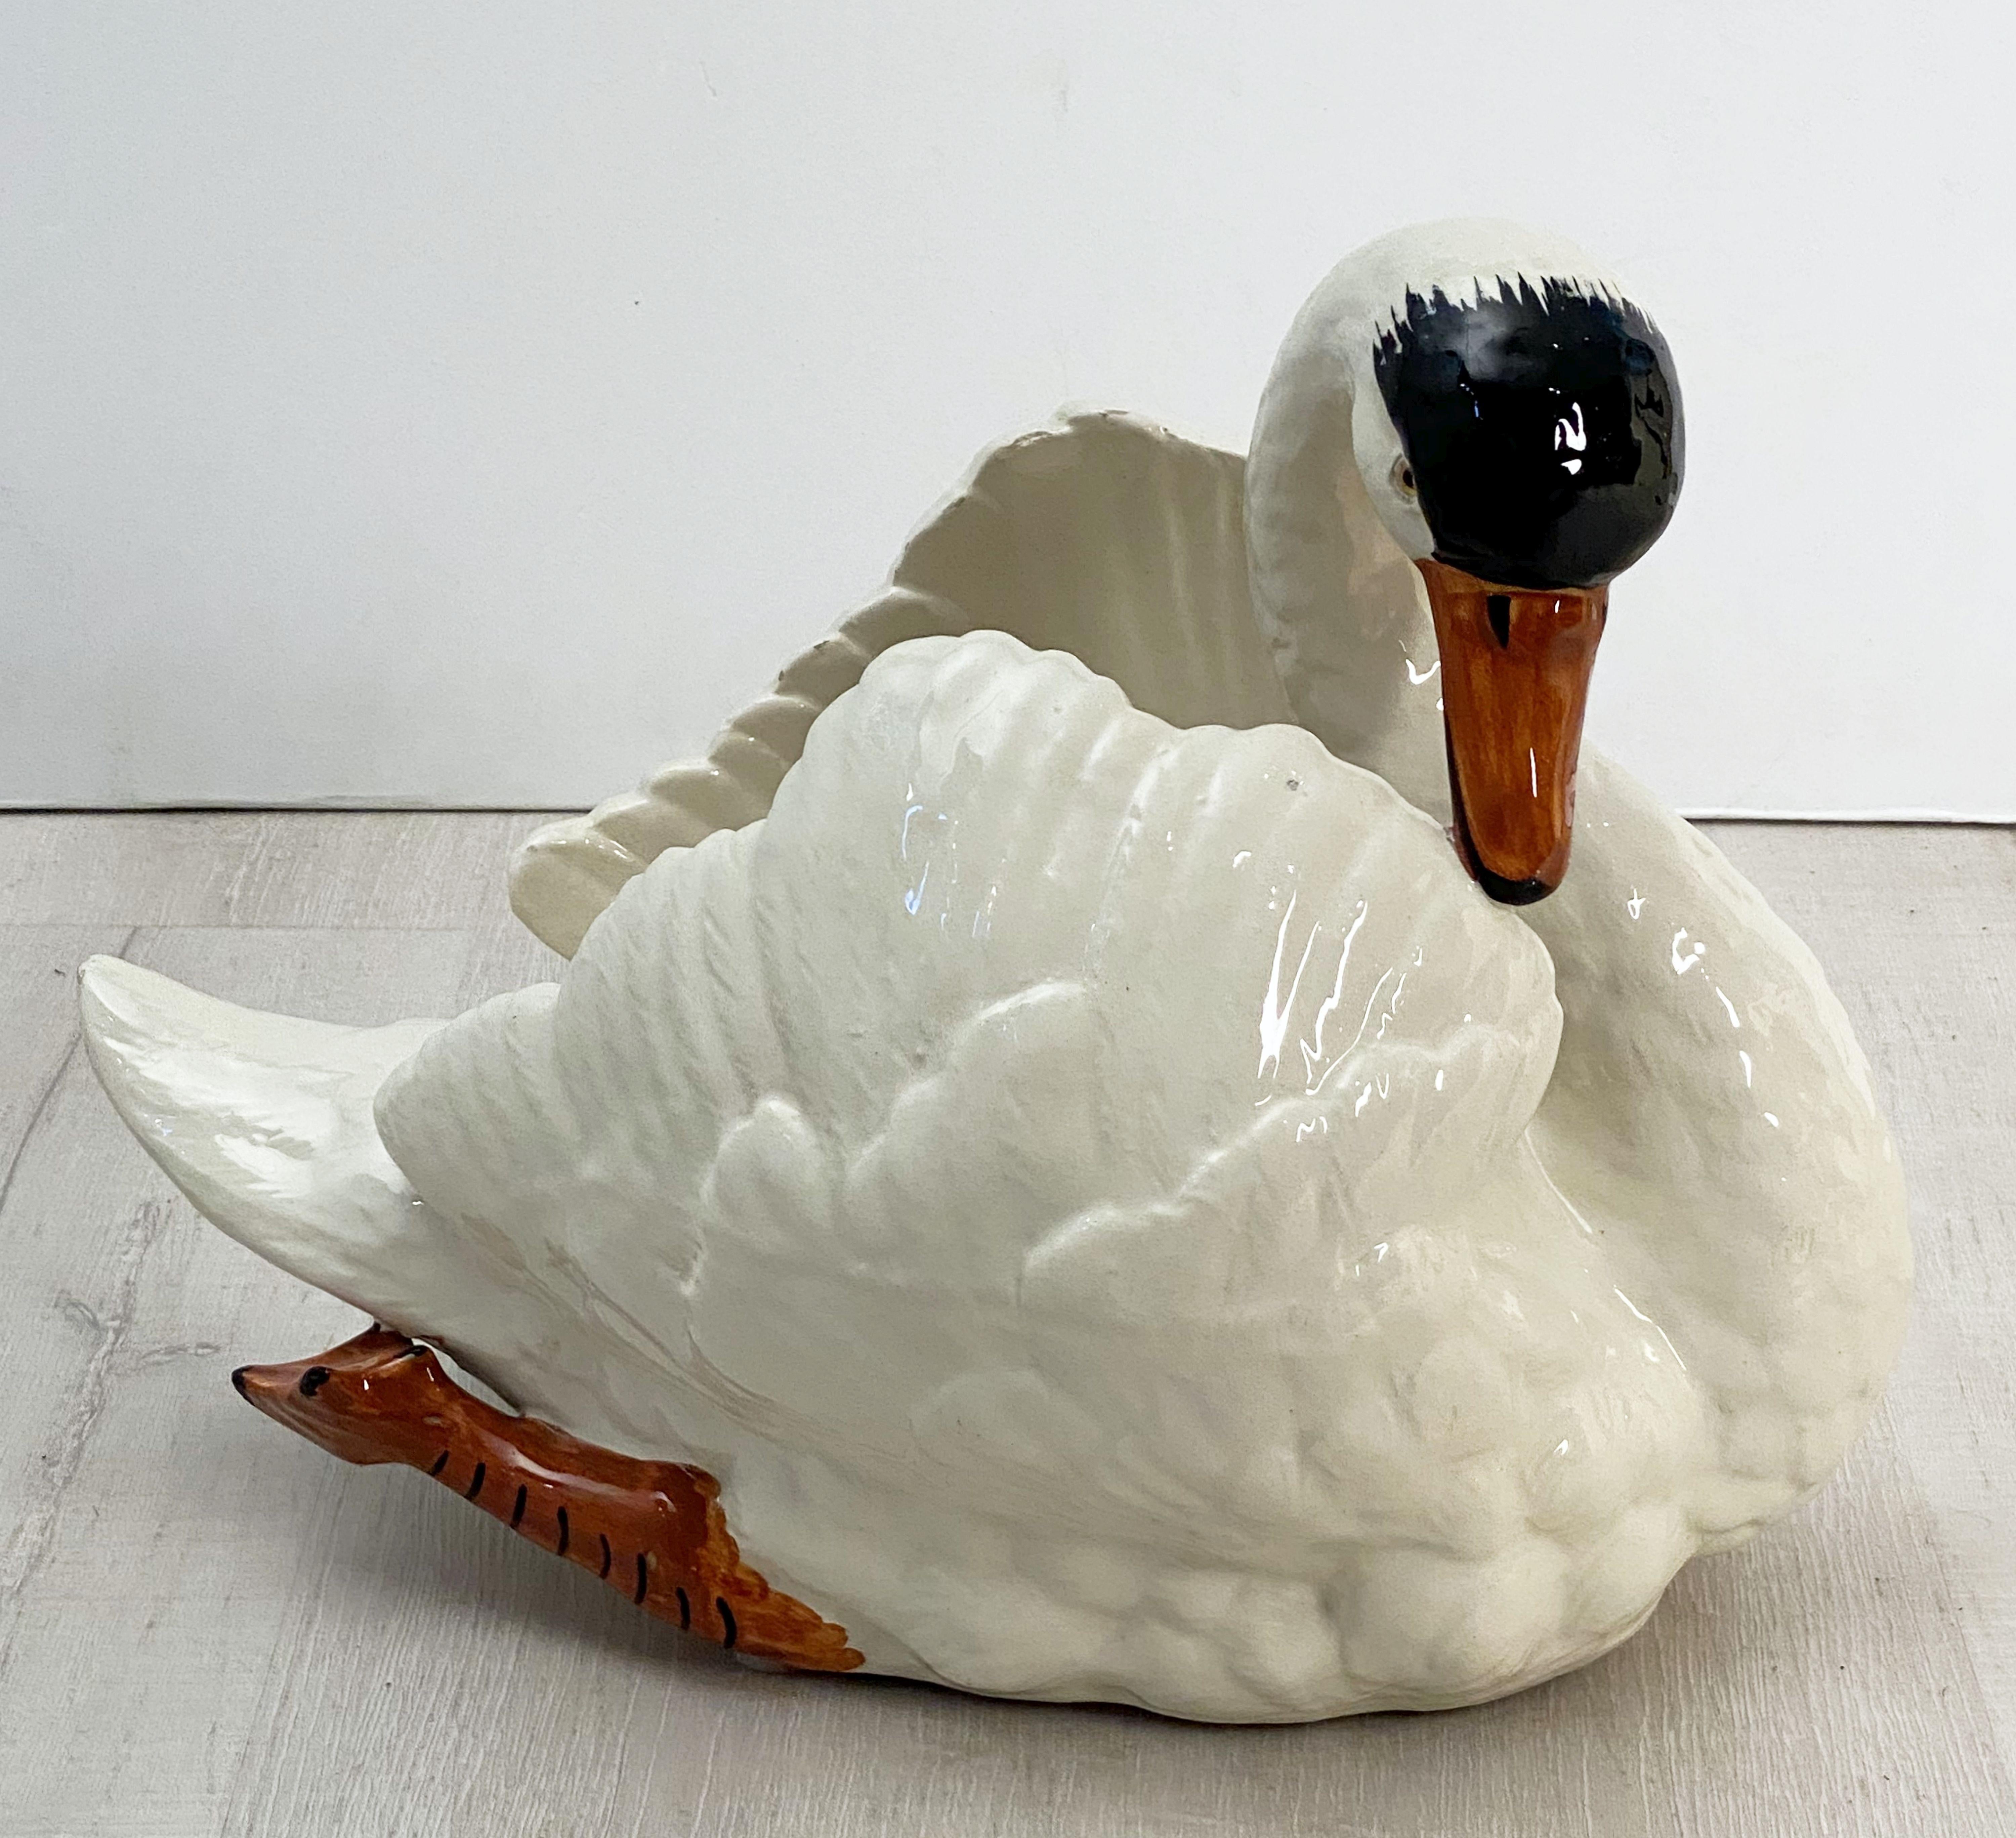 A fine Belgian large figurative swan planter or vase featuring an elegantly modeled swan in white with hand painted accents.